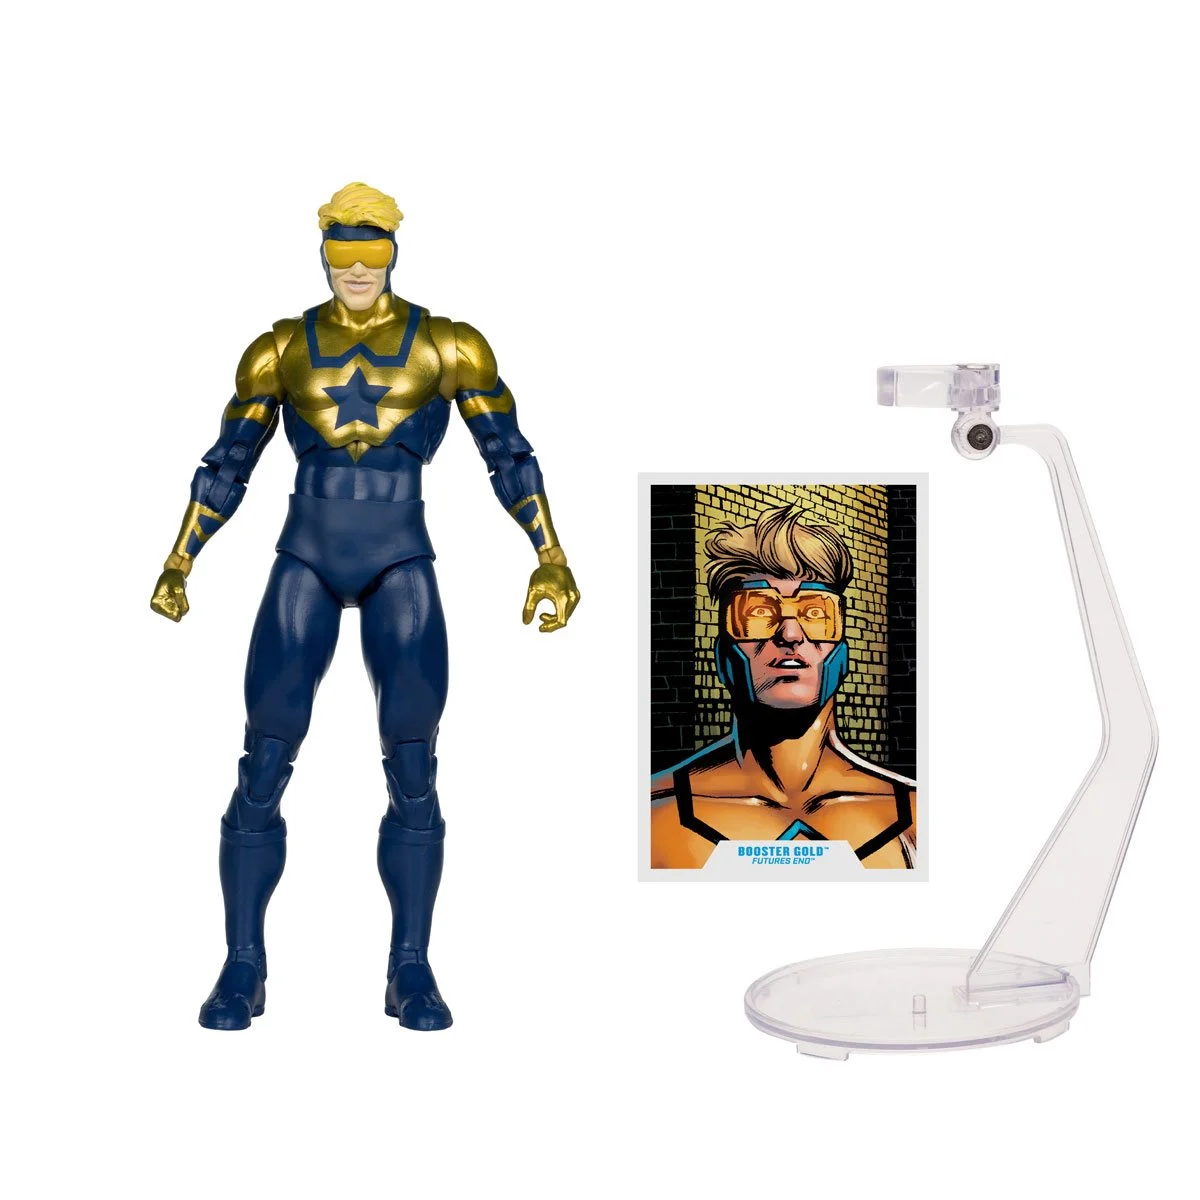 DC Multiverse 7-inch Futures End Booster Gold Action Figure